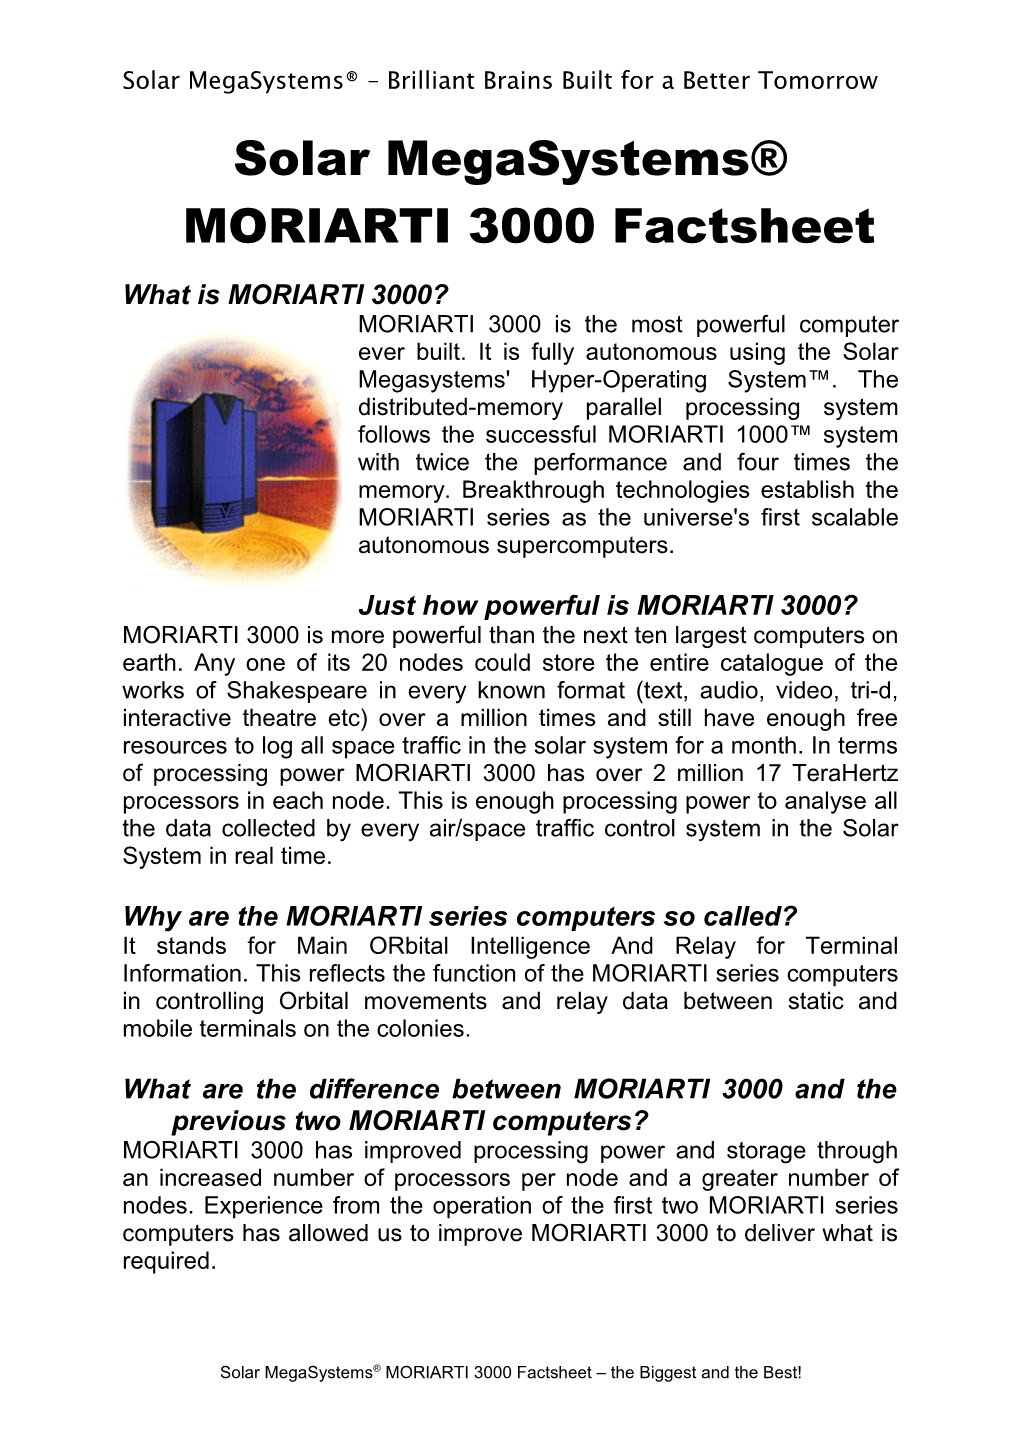 MORIARTI 3000 Frequently Asked Questions